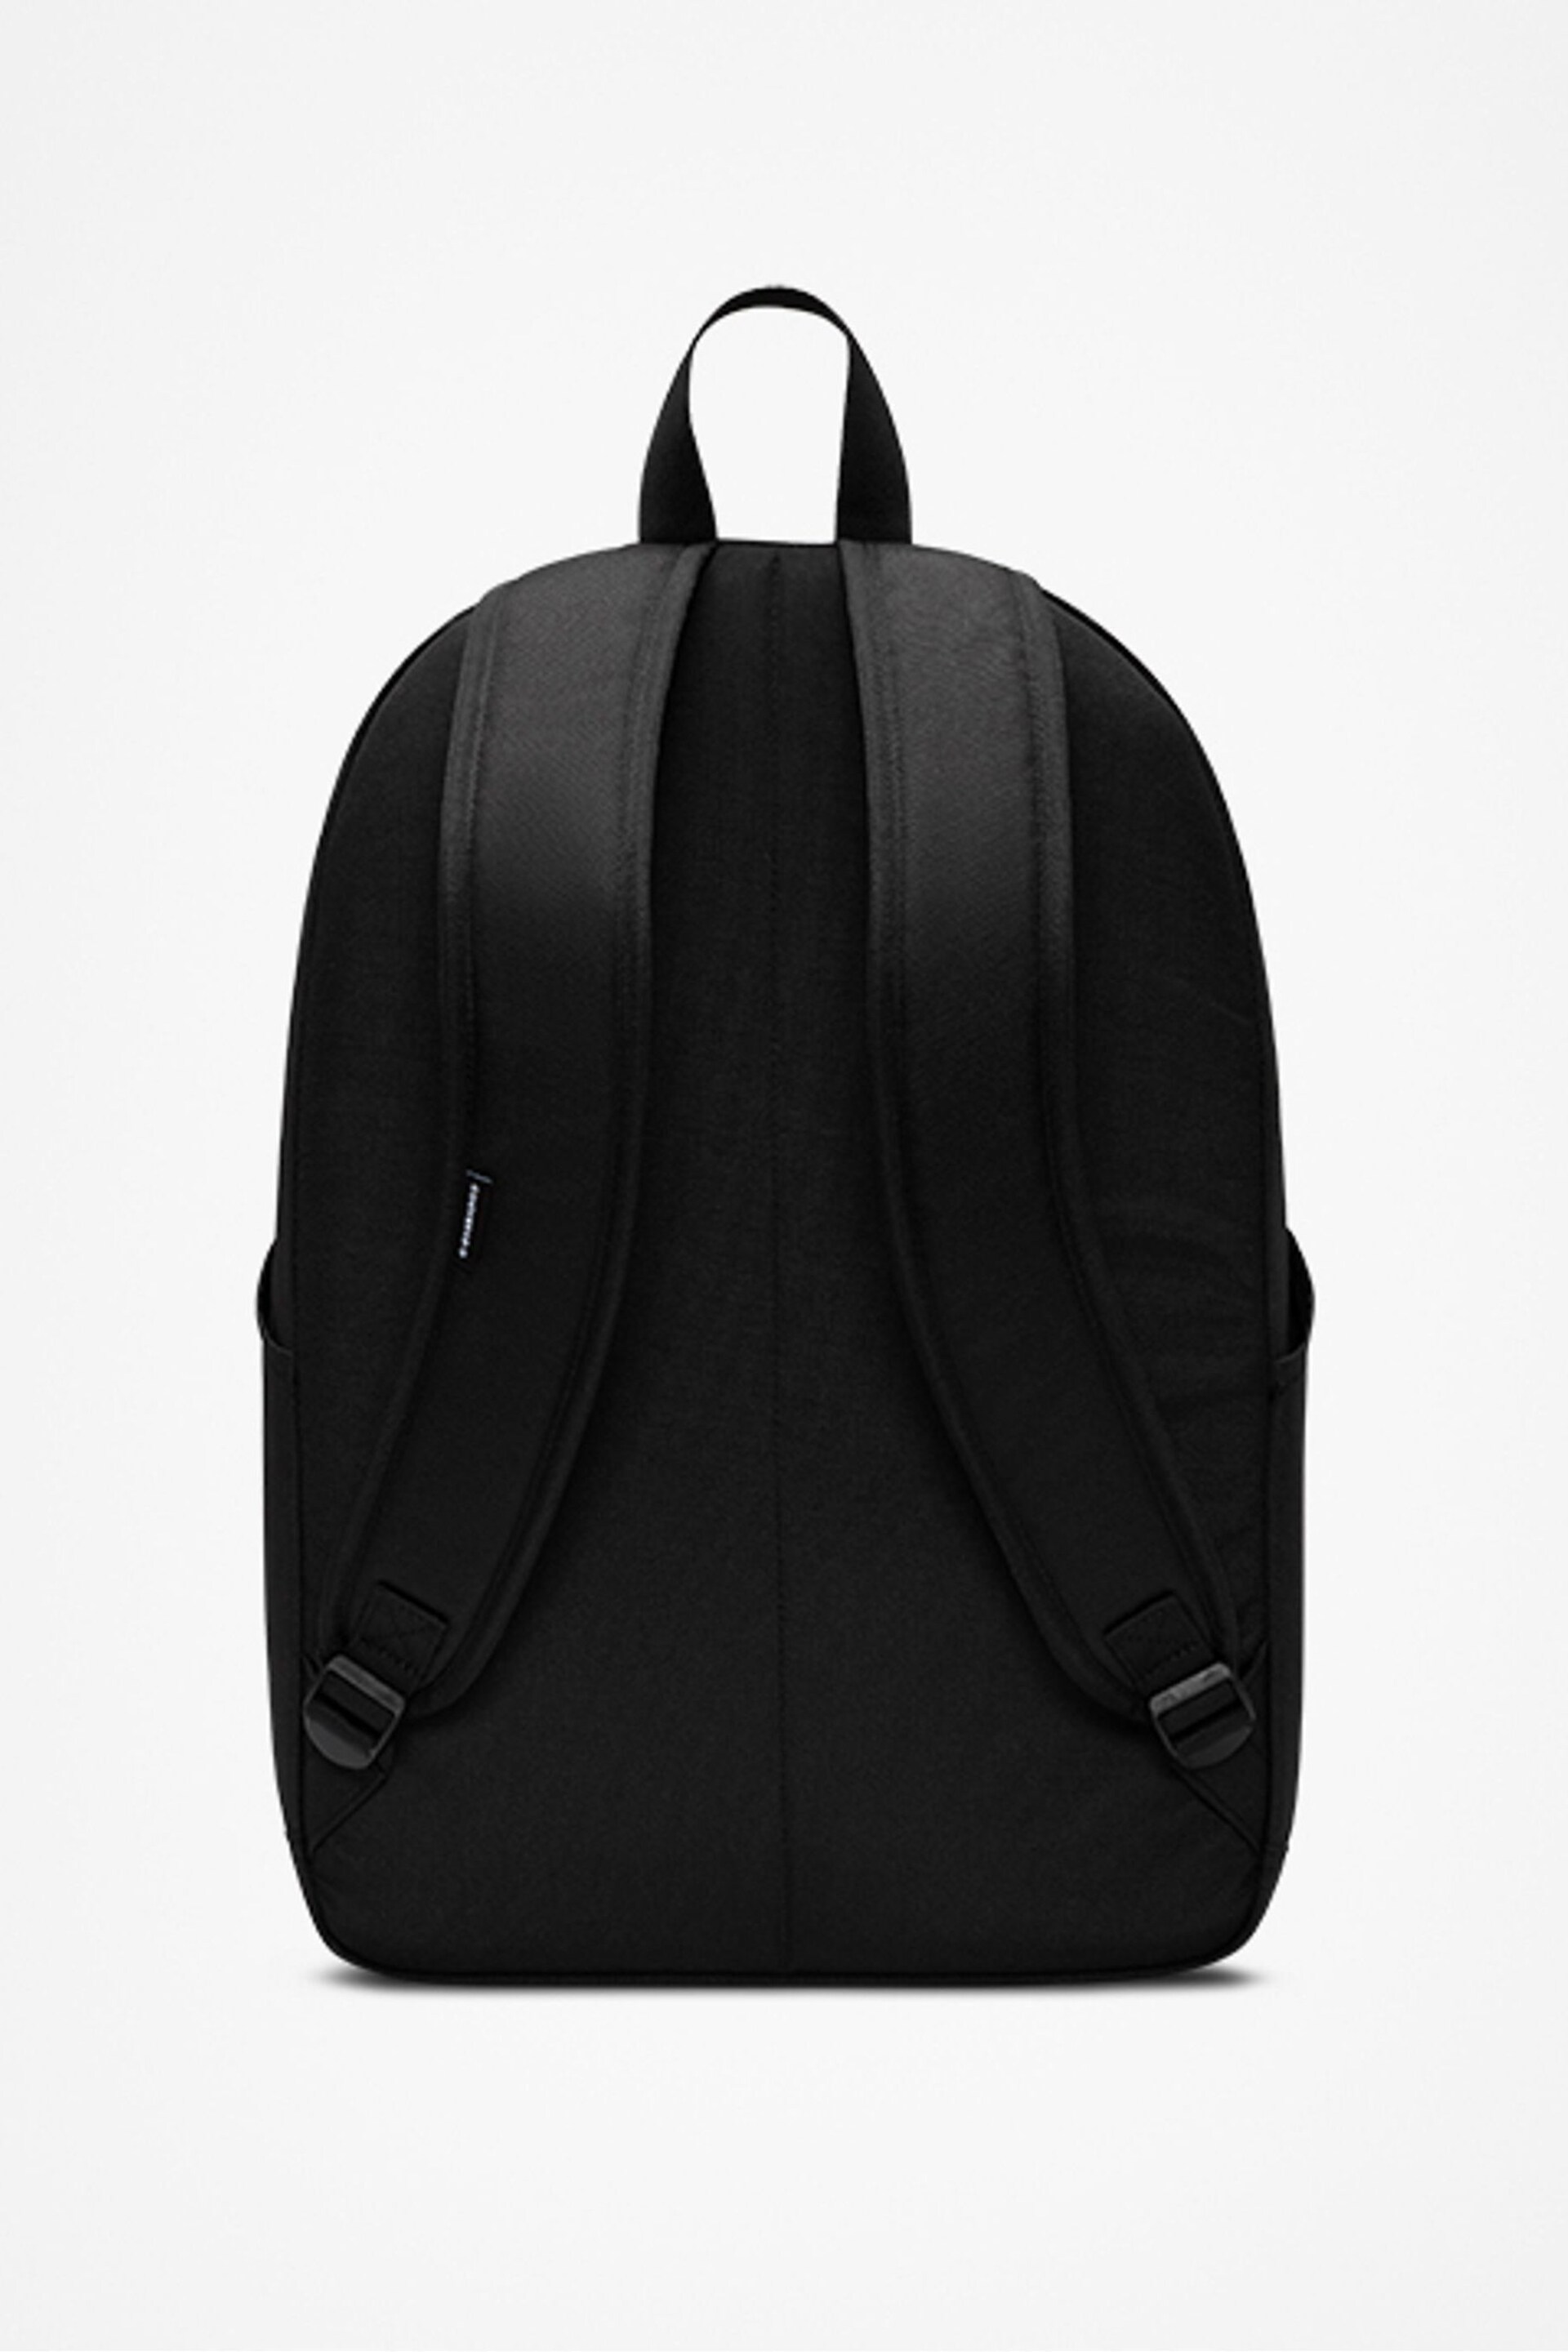 Converse Black Converse Black Go 2 Backpack - Image 2 of 6